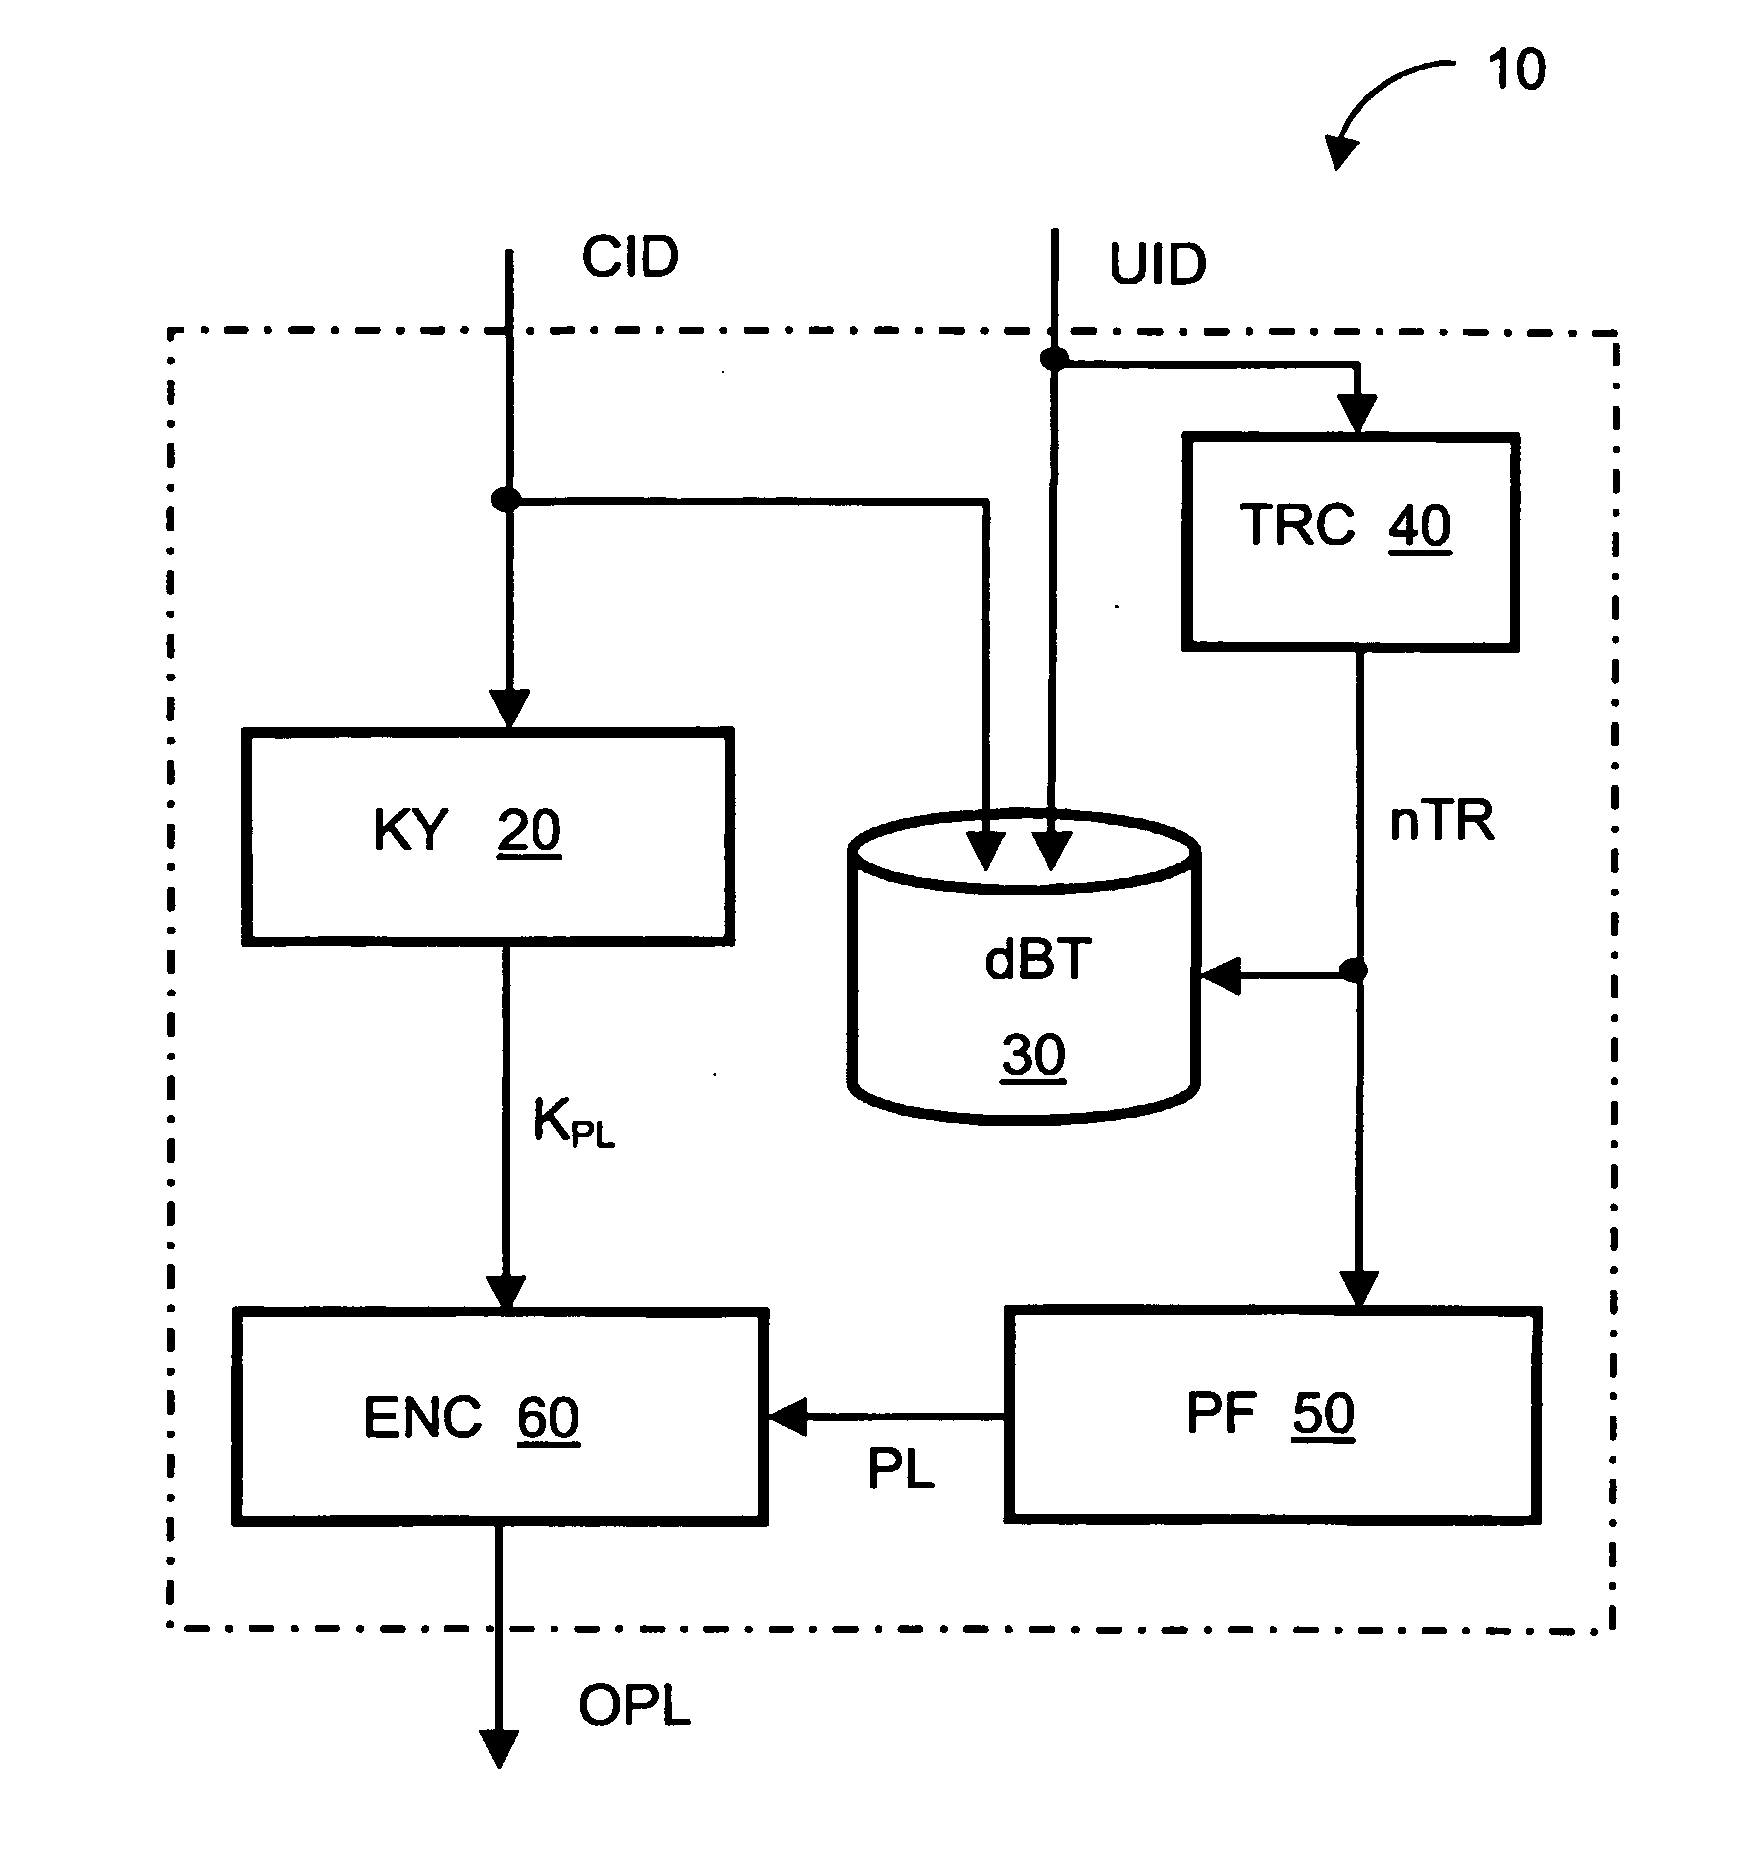 Method of allocating optimal payload space